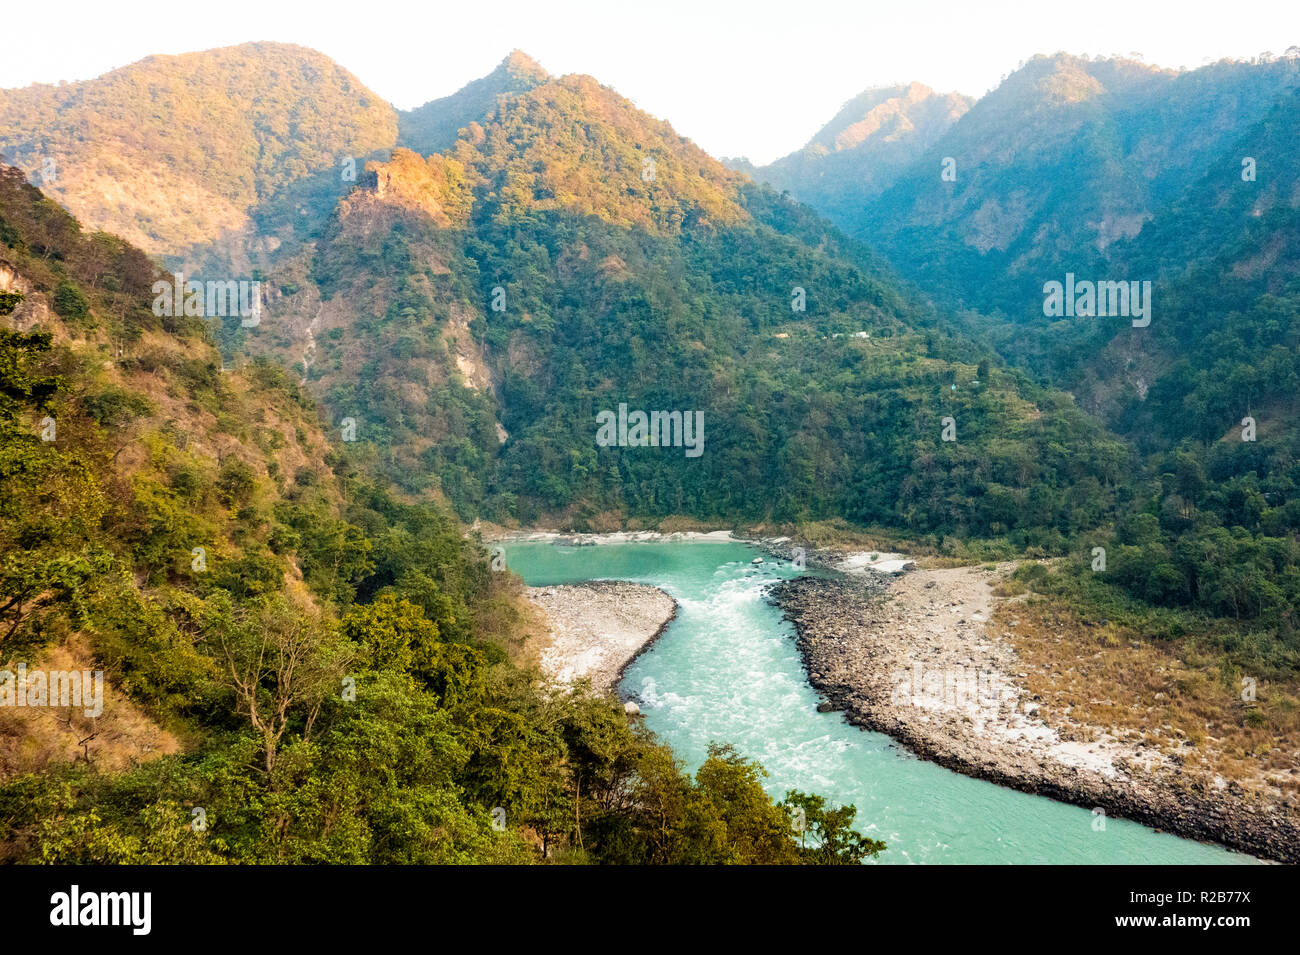 Spectacular view of the sacred Ganges river flowing through the green mountains of Rishikesh, Uttarakhand, India. Stock Photo